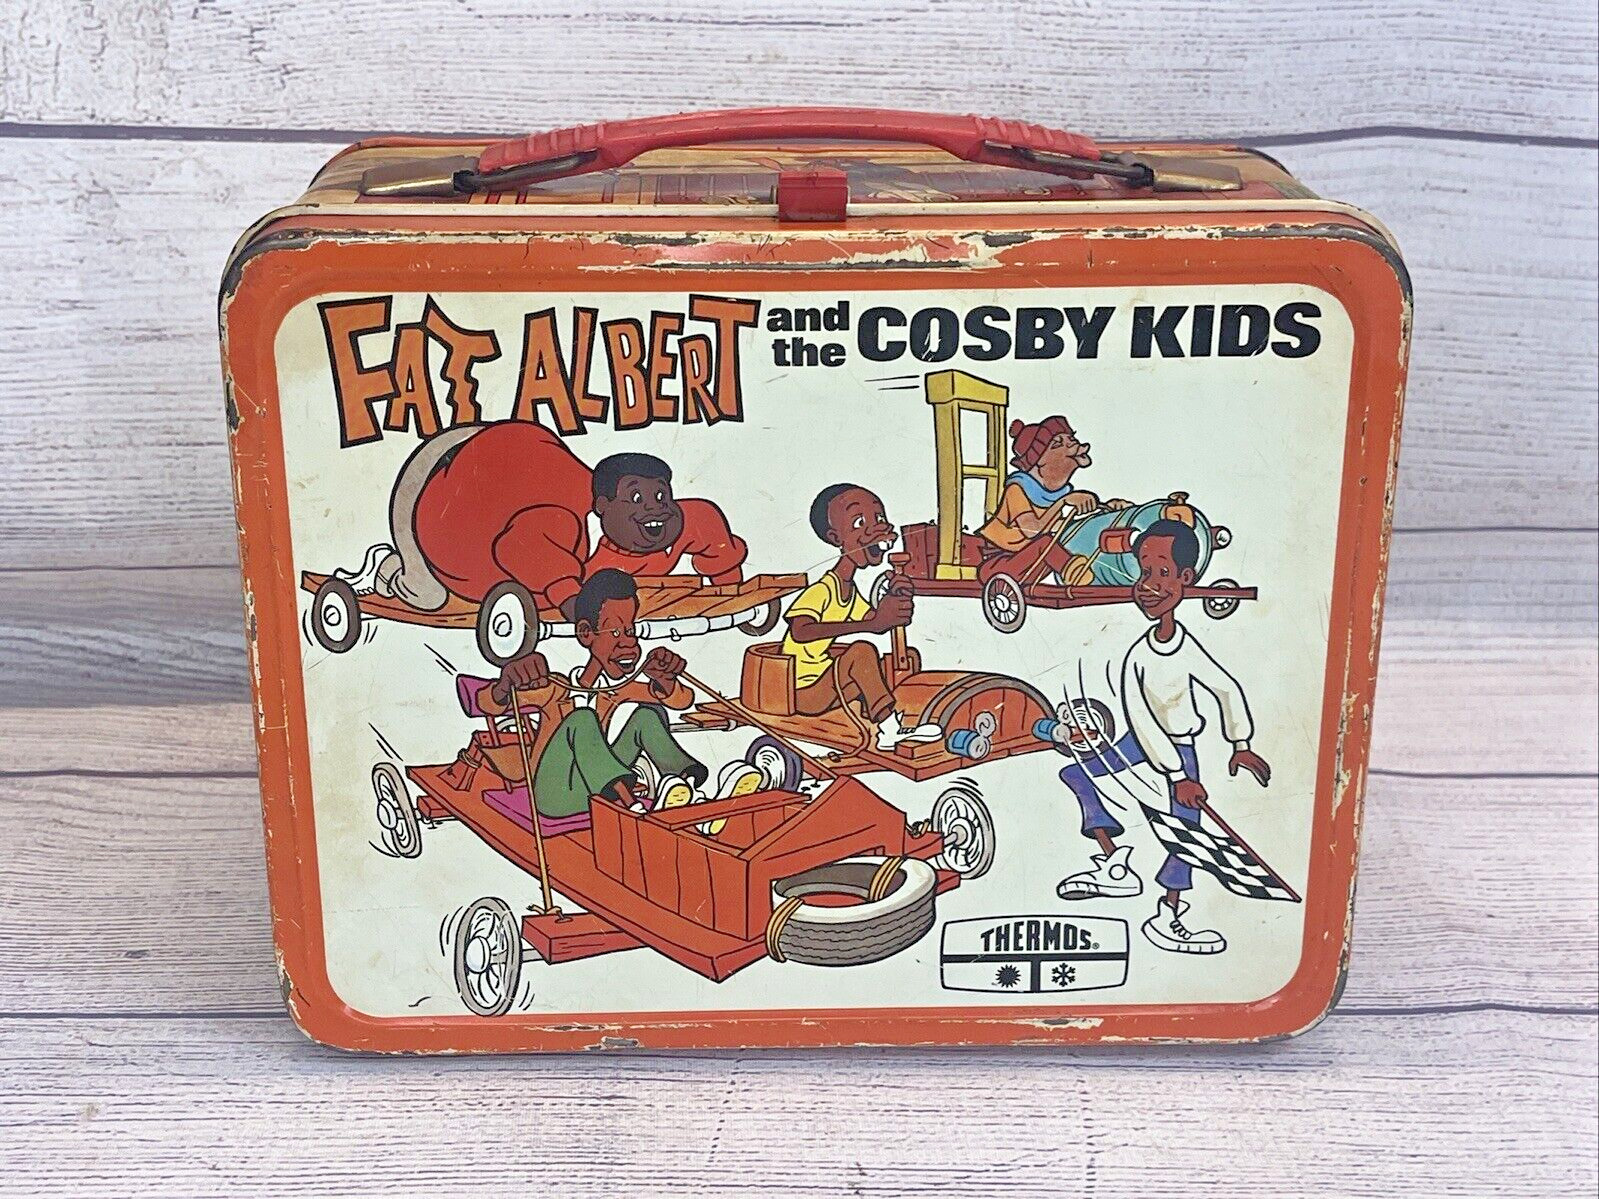 Vintage 1973 Thermos Fat Albert and the Cosby Kids Lunchbox no Thermos